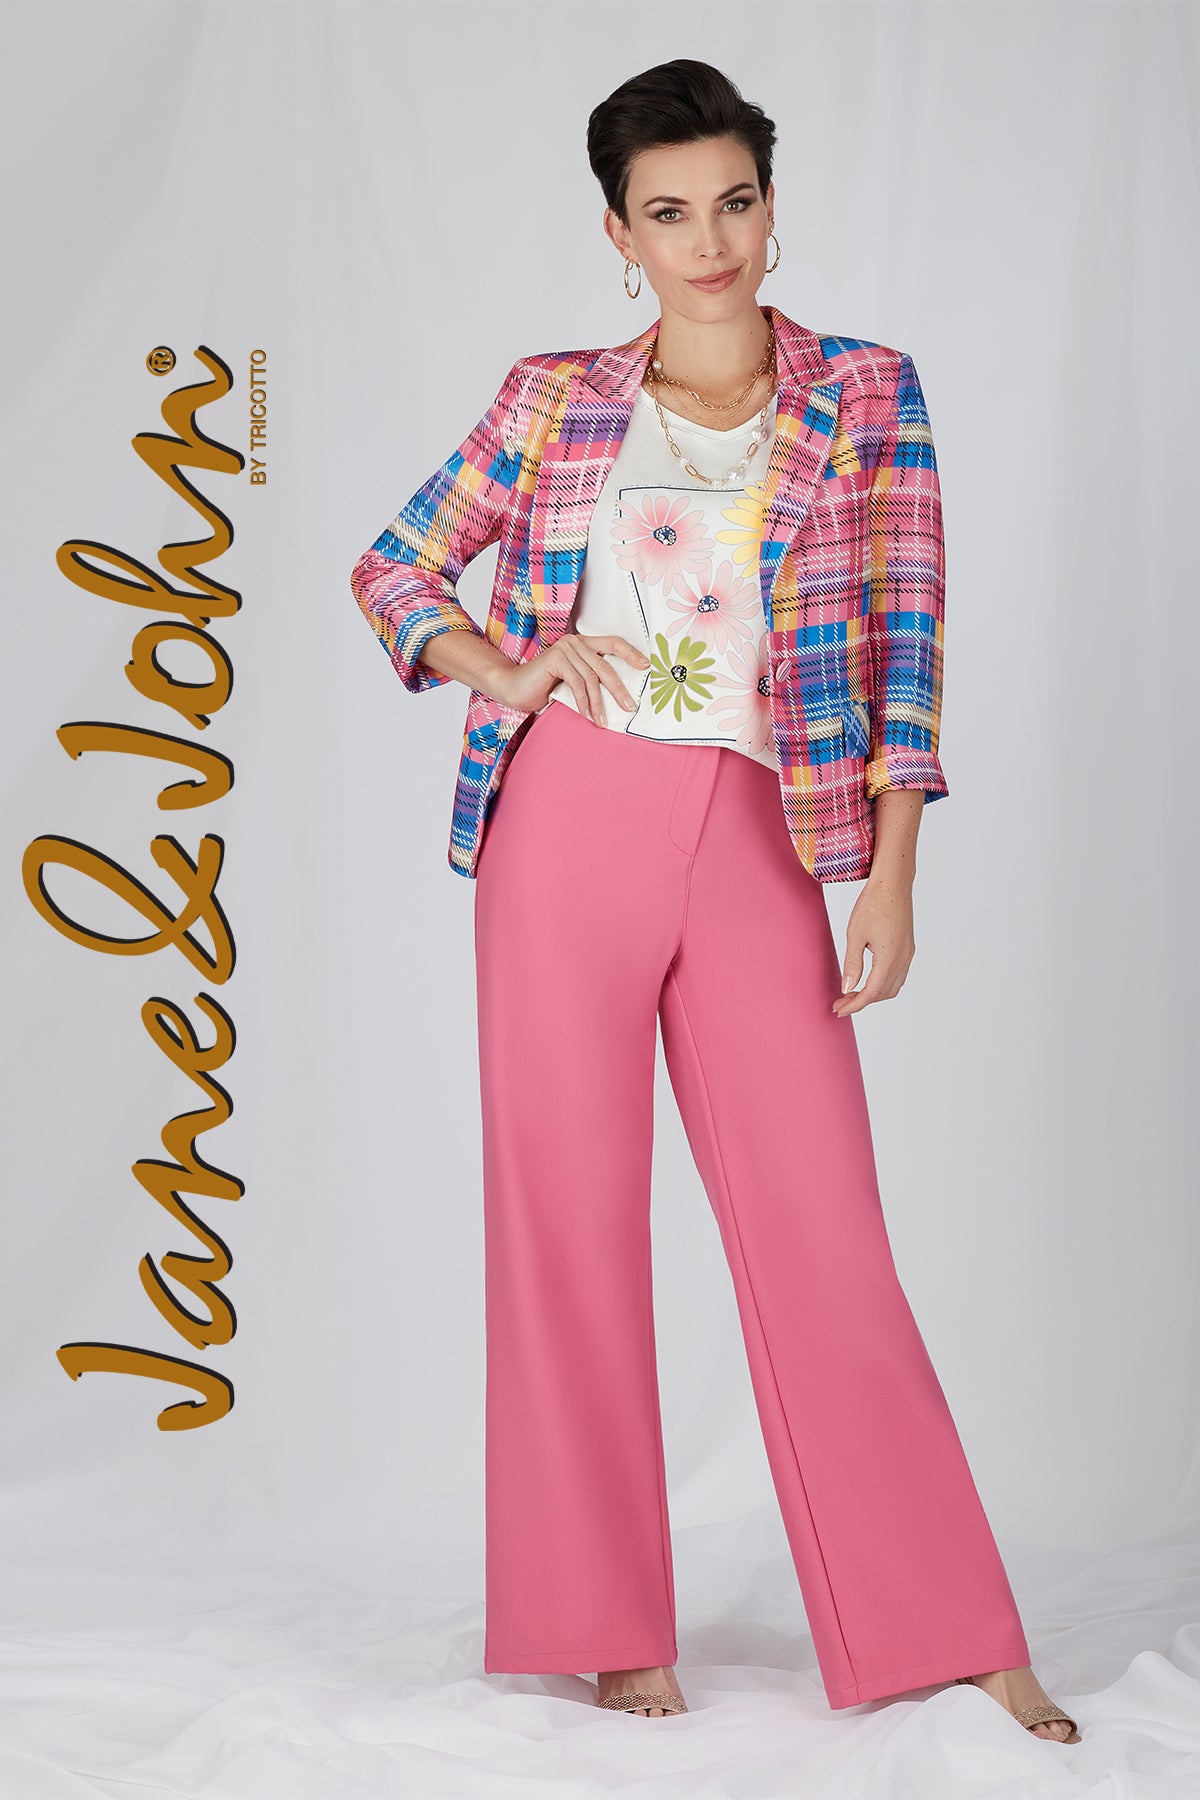 Jane & John Pink Plaid Jacket with pockets and button front